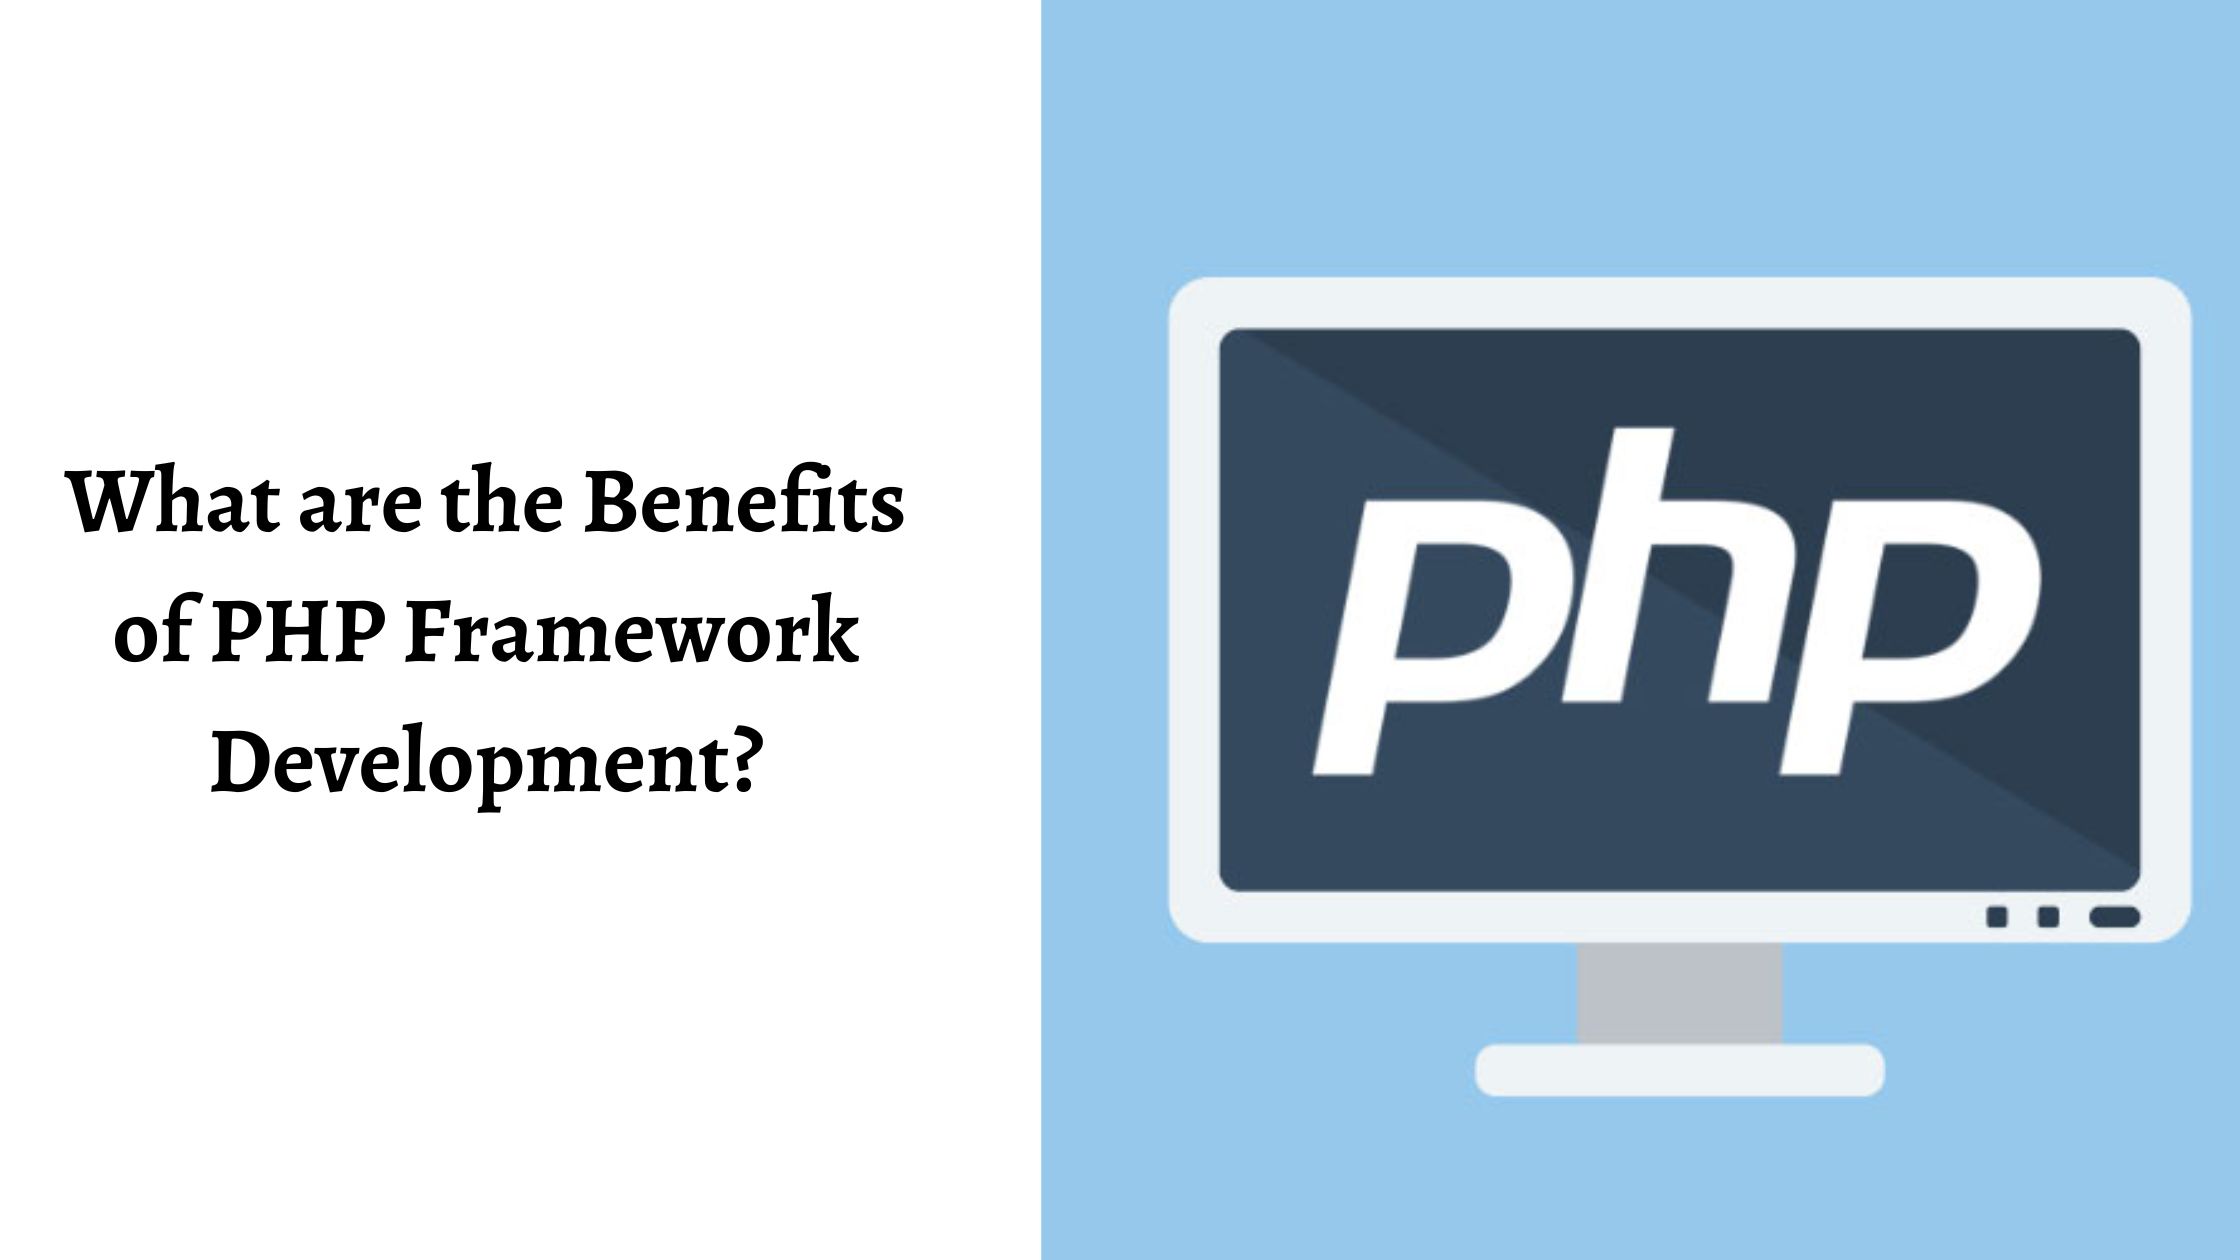 What are the Benefits of PHP Framework Development